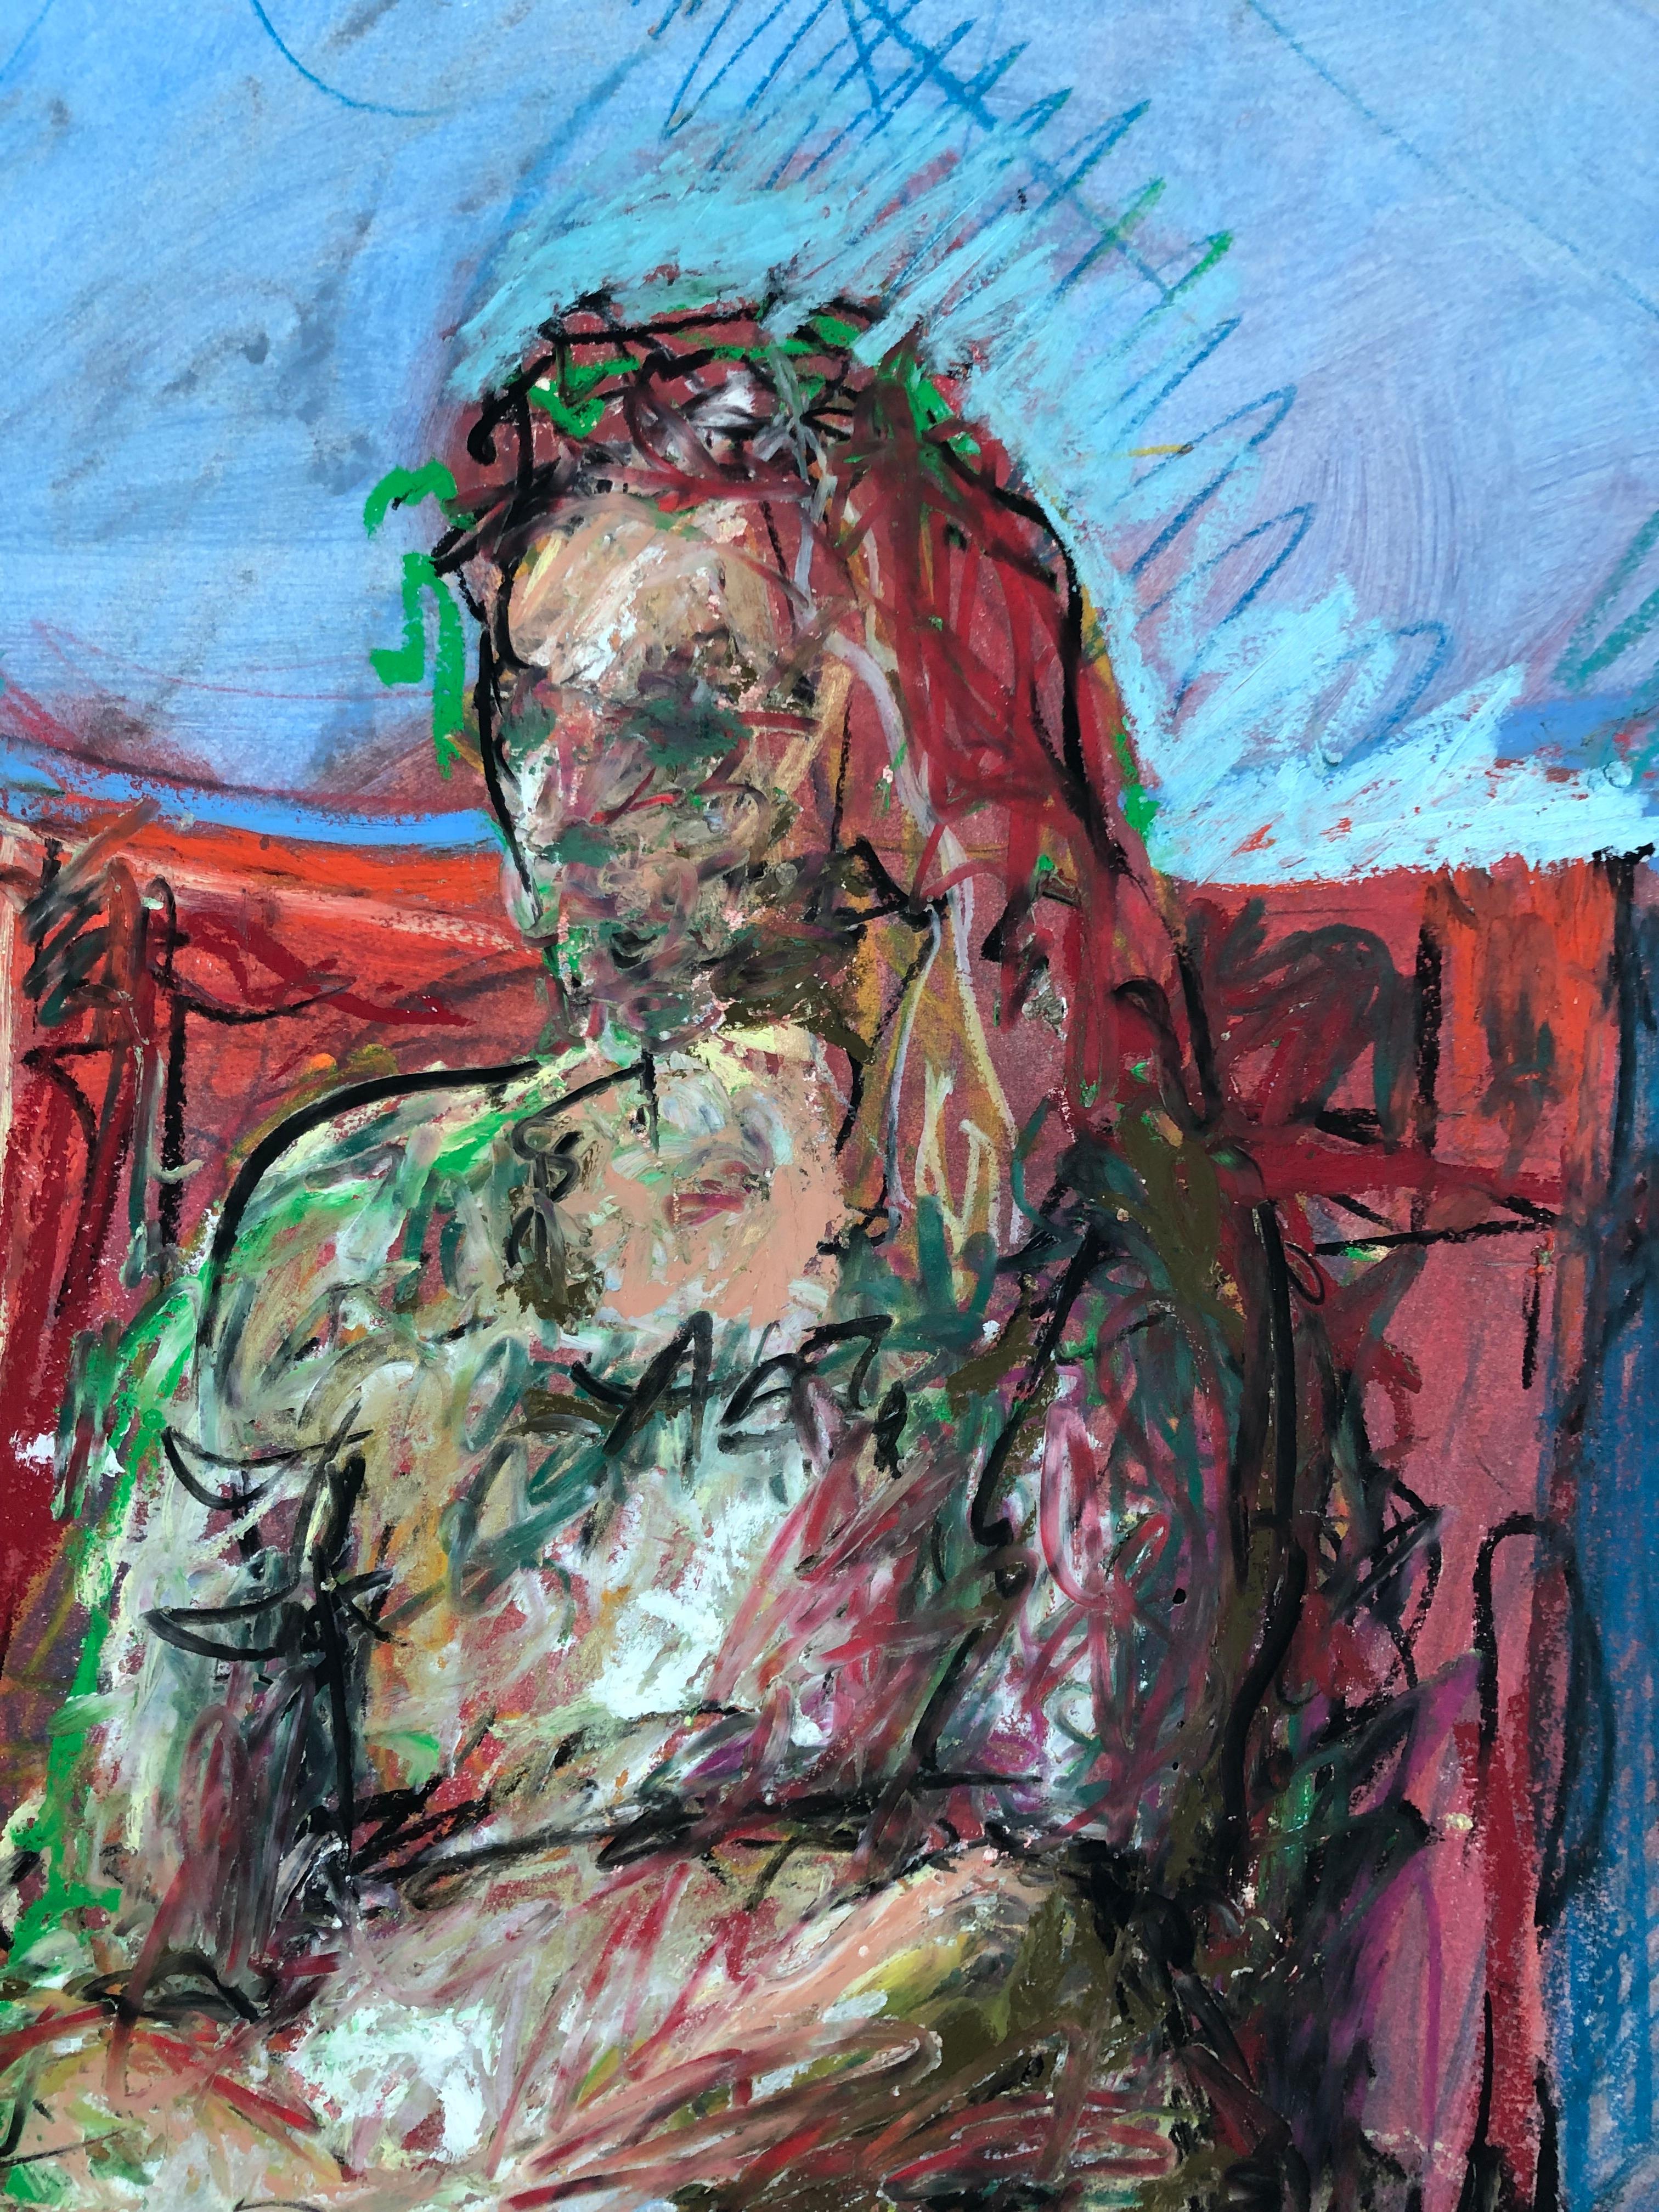 Woman in the Chair - Expressionist Painting by Rafael Saldarriaga